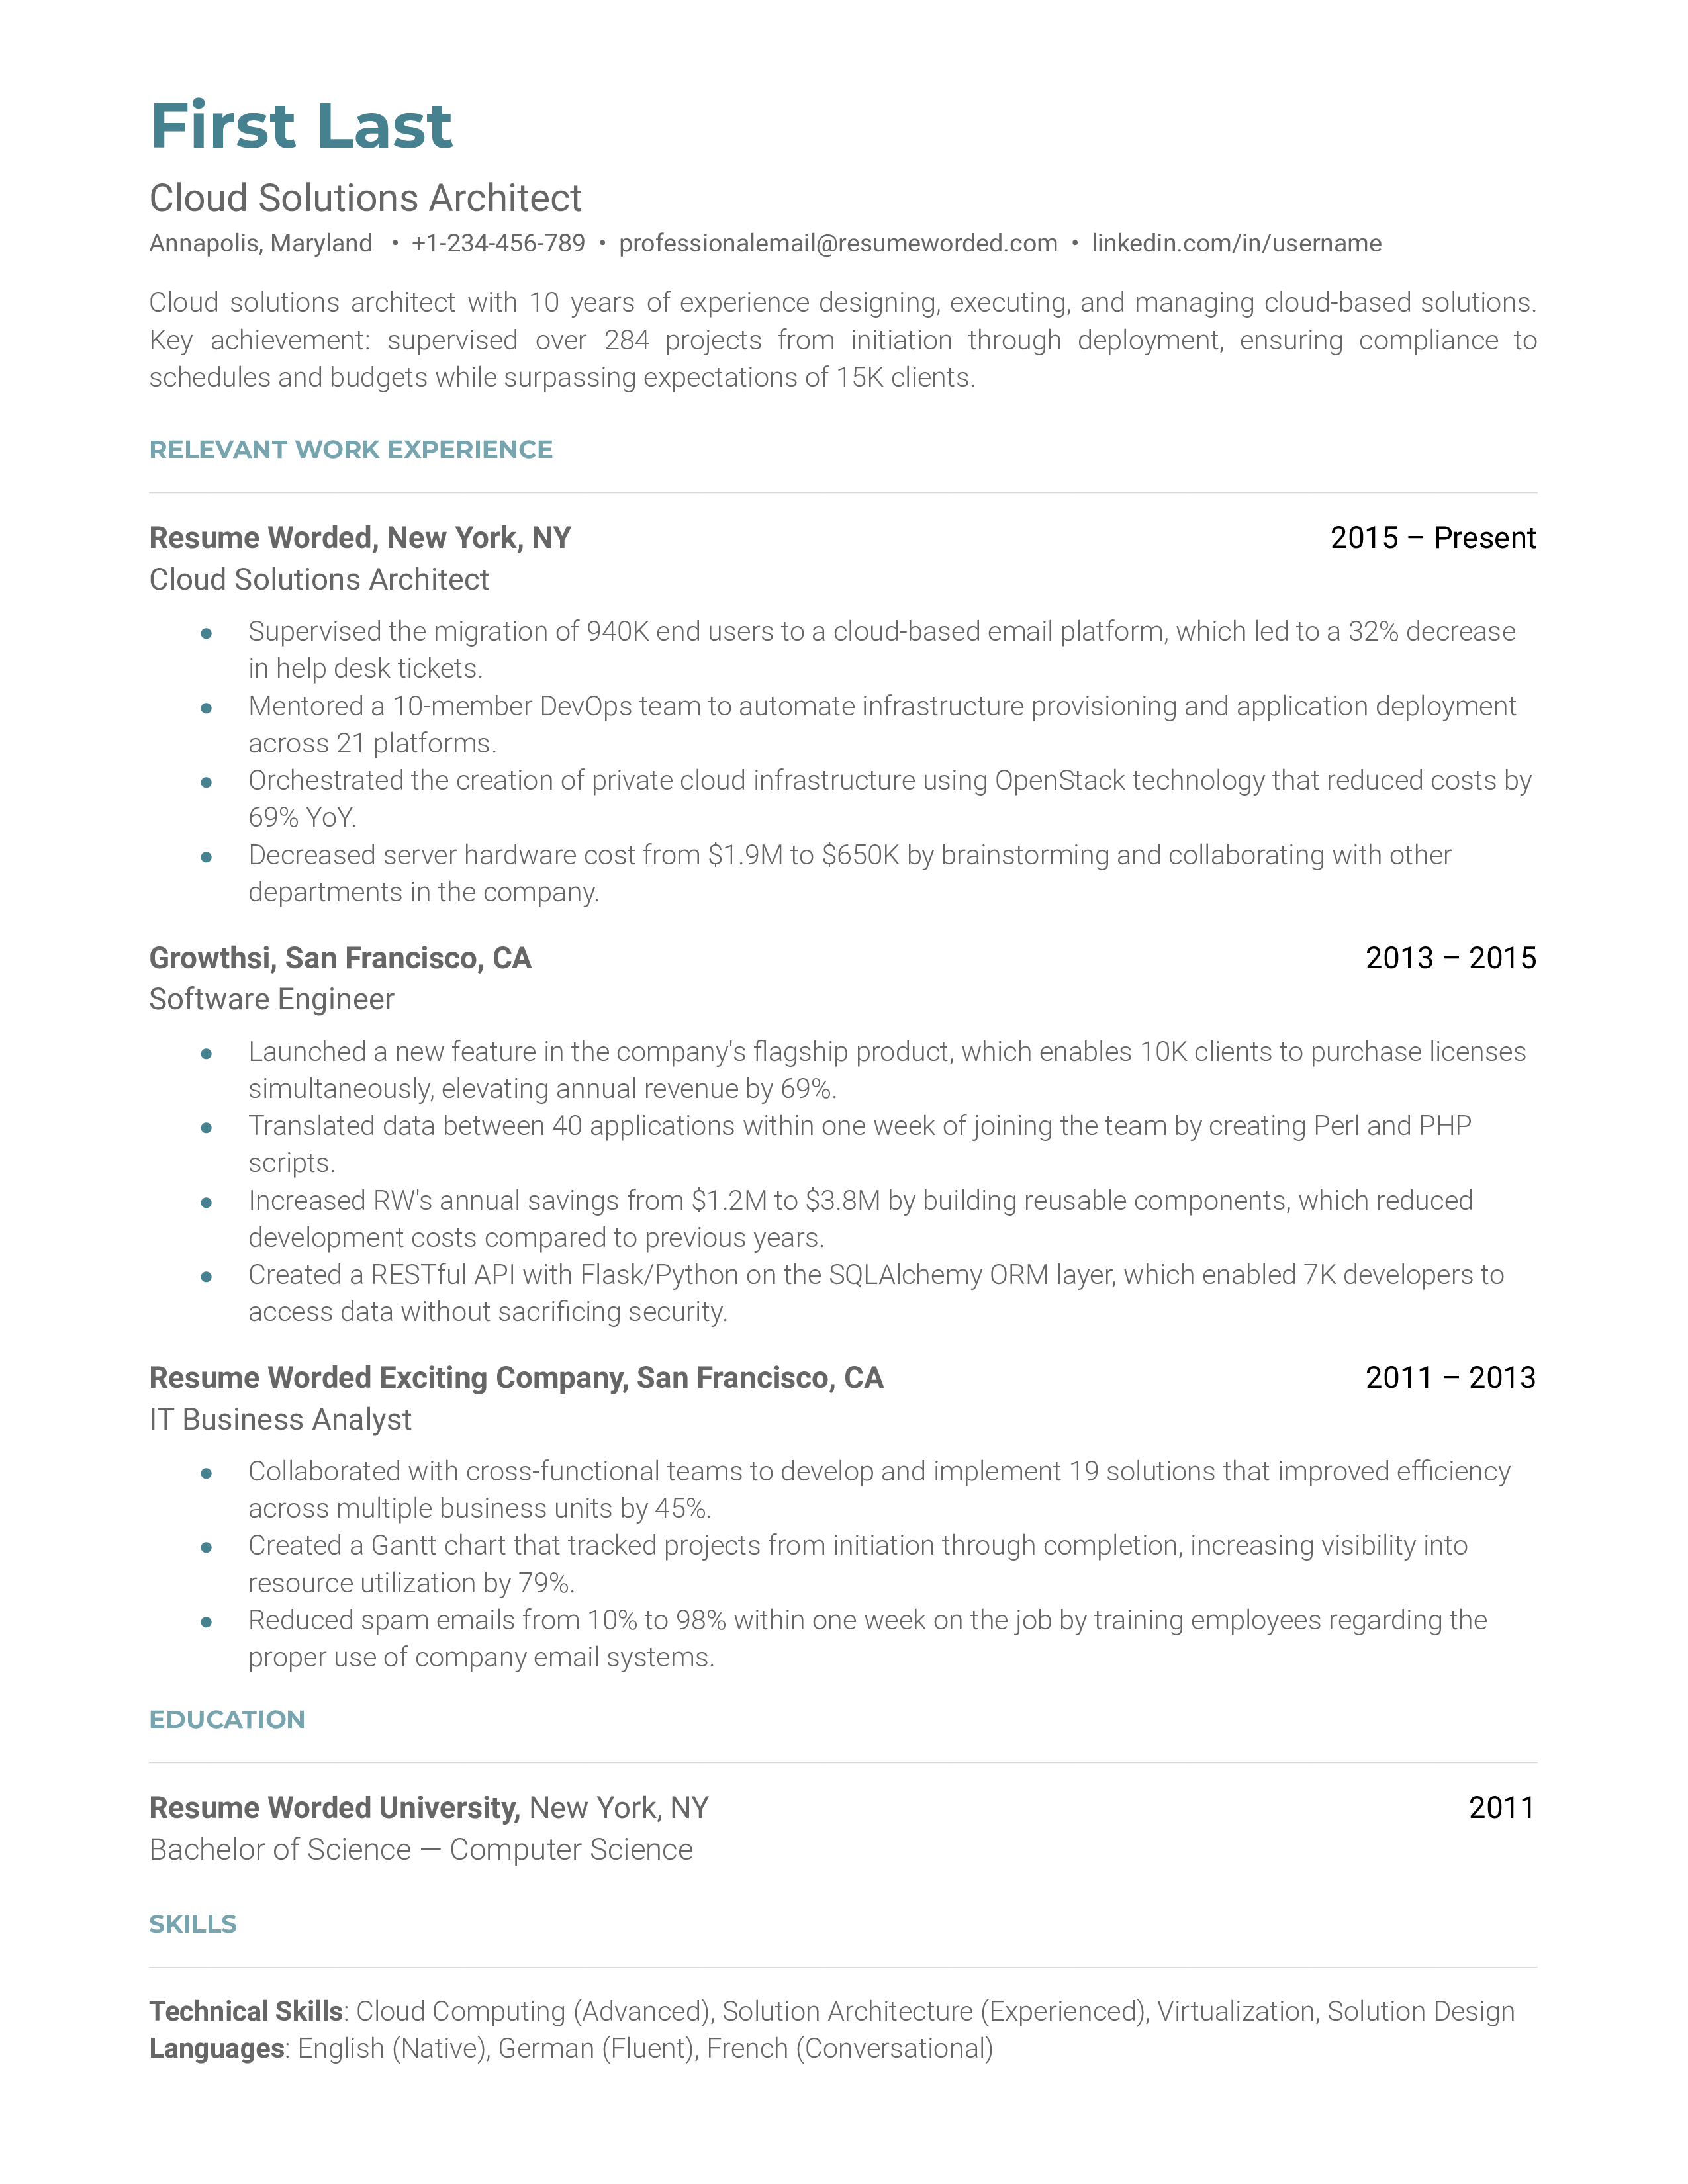 Cloud Solutions Architect Resume Sample